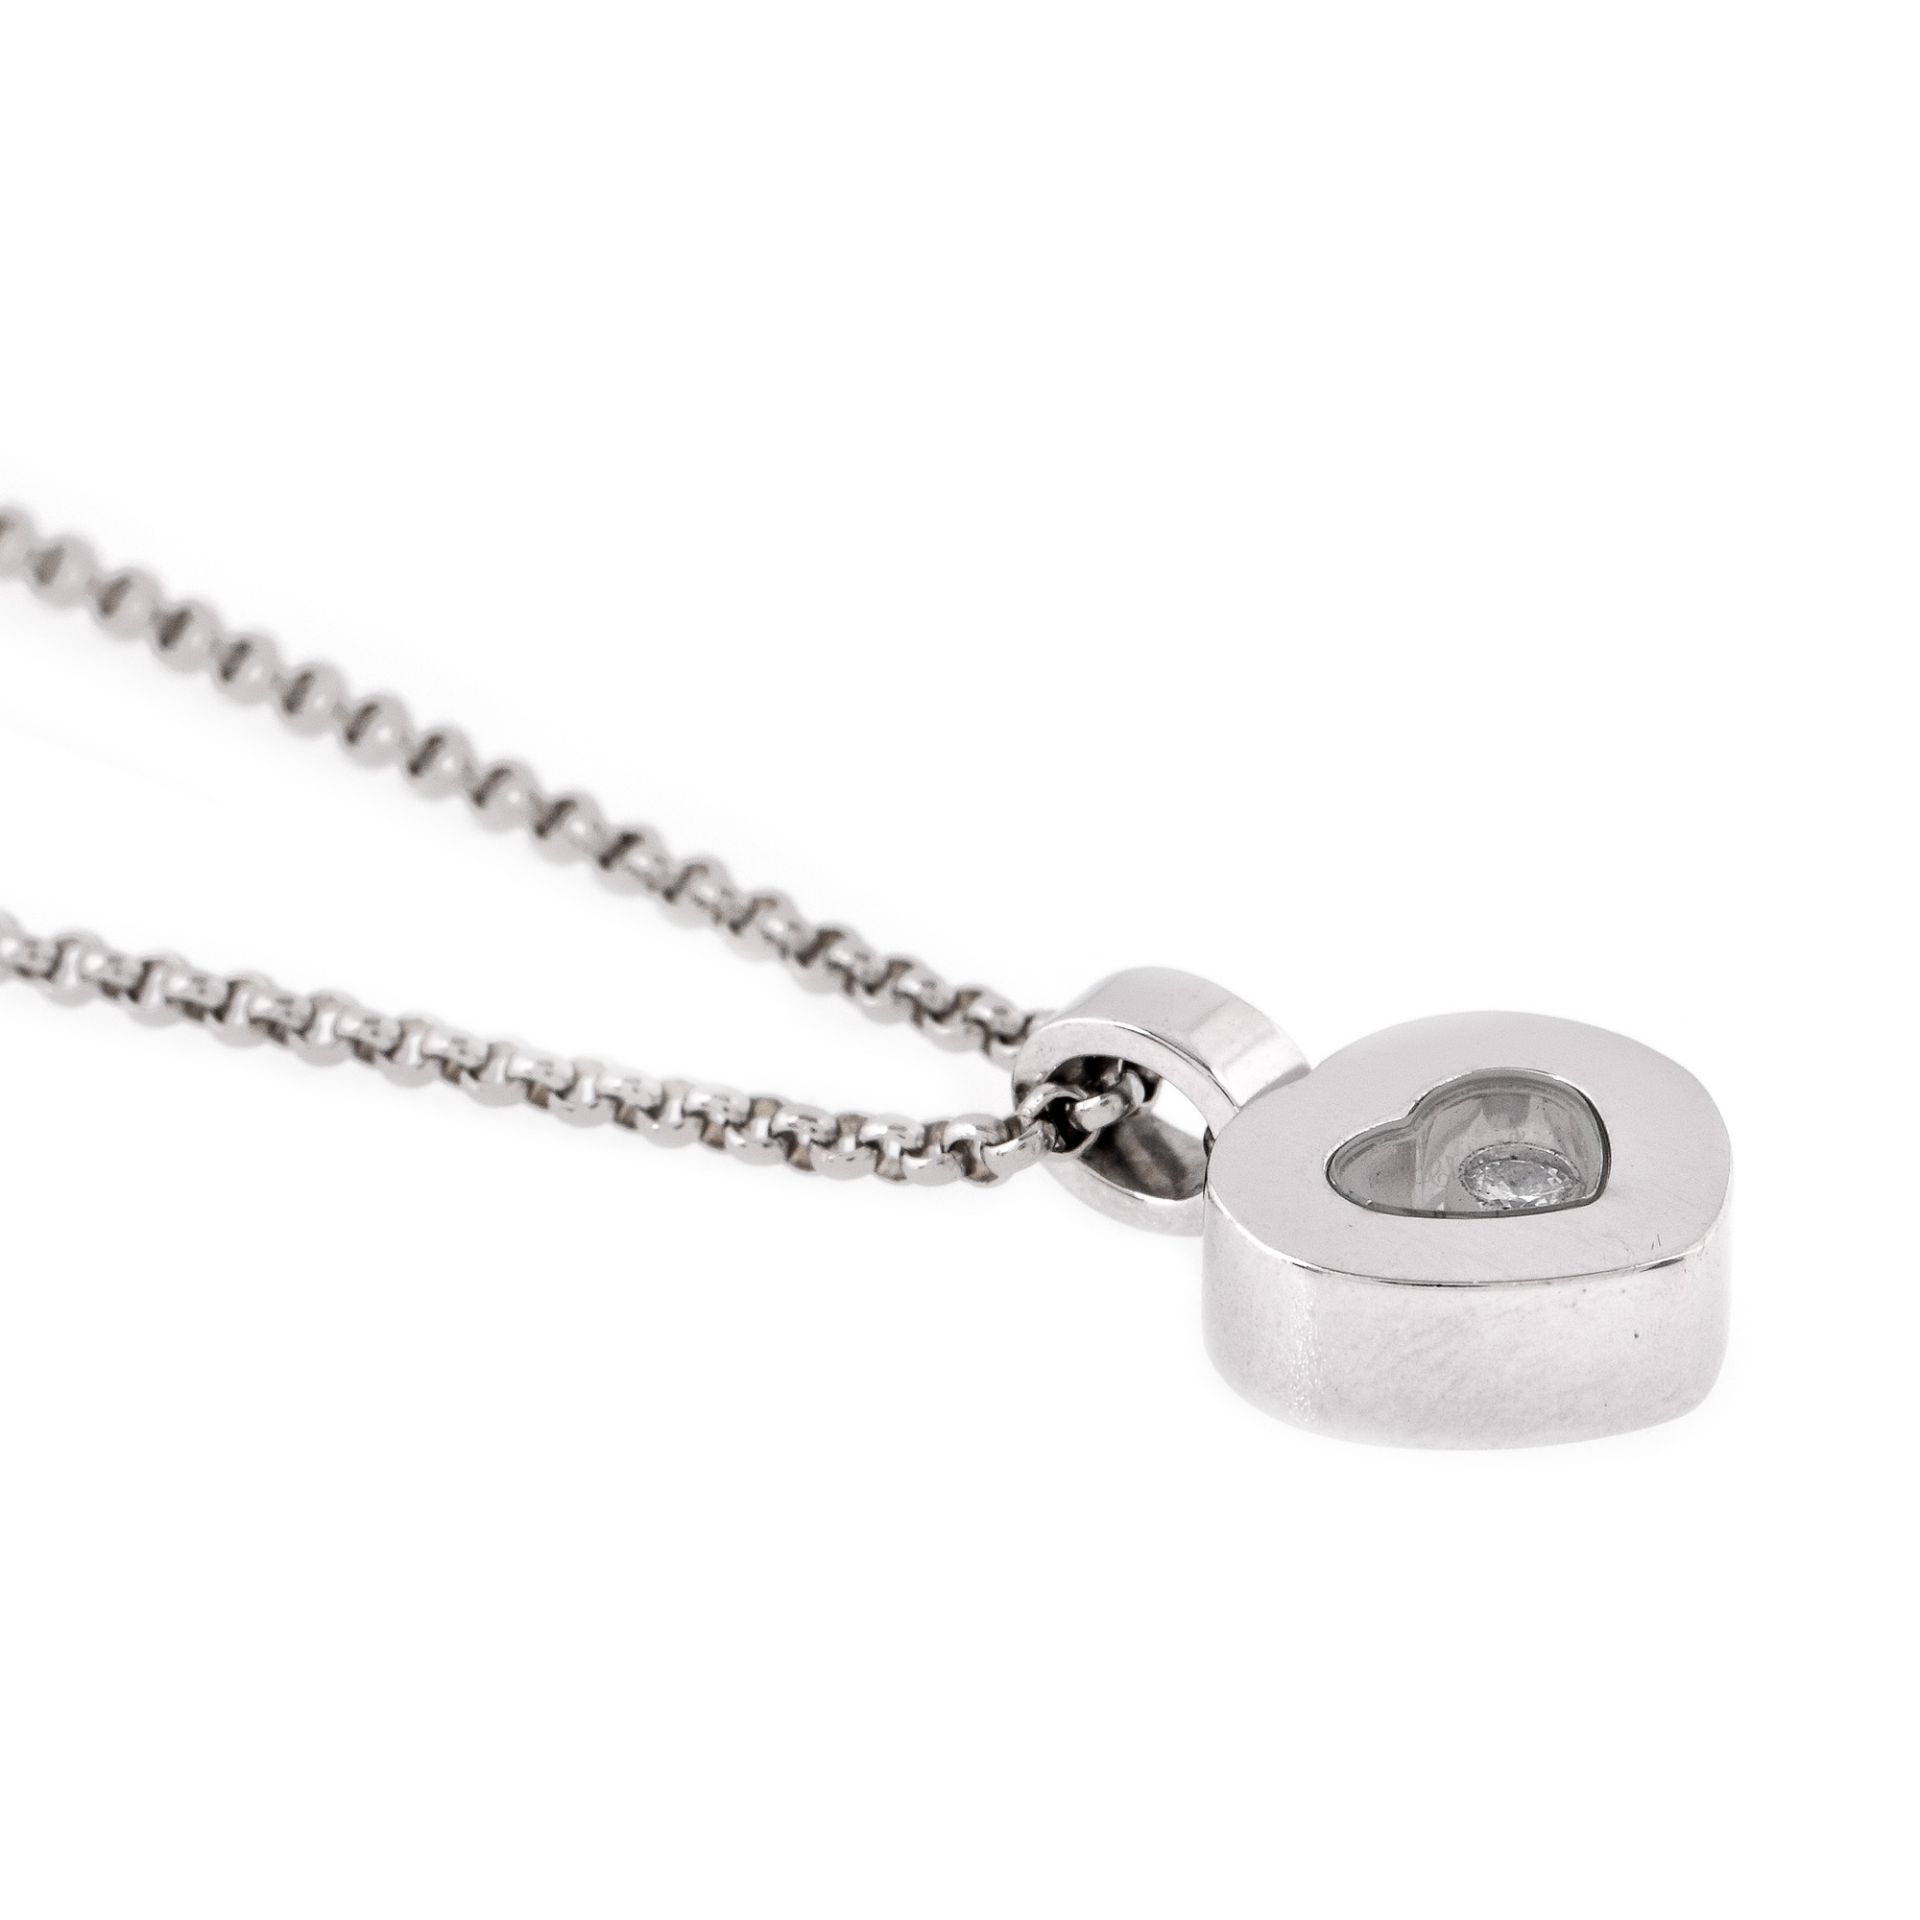 Chopard chain with pendant, white gold, decorated with a moving diamond - Bild 2 aus 2